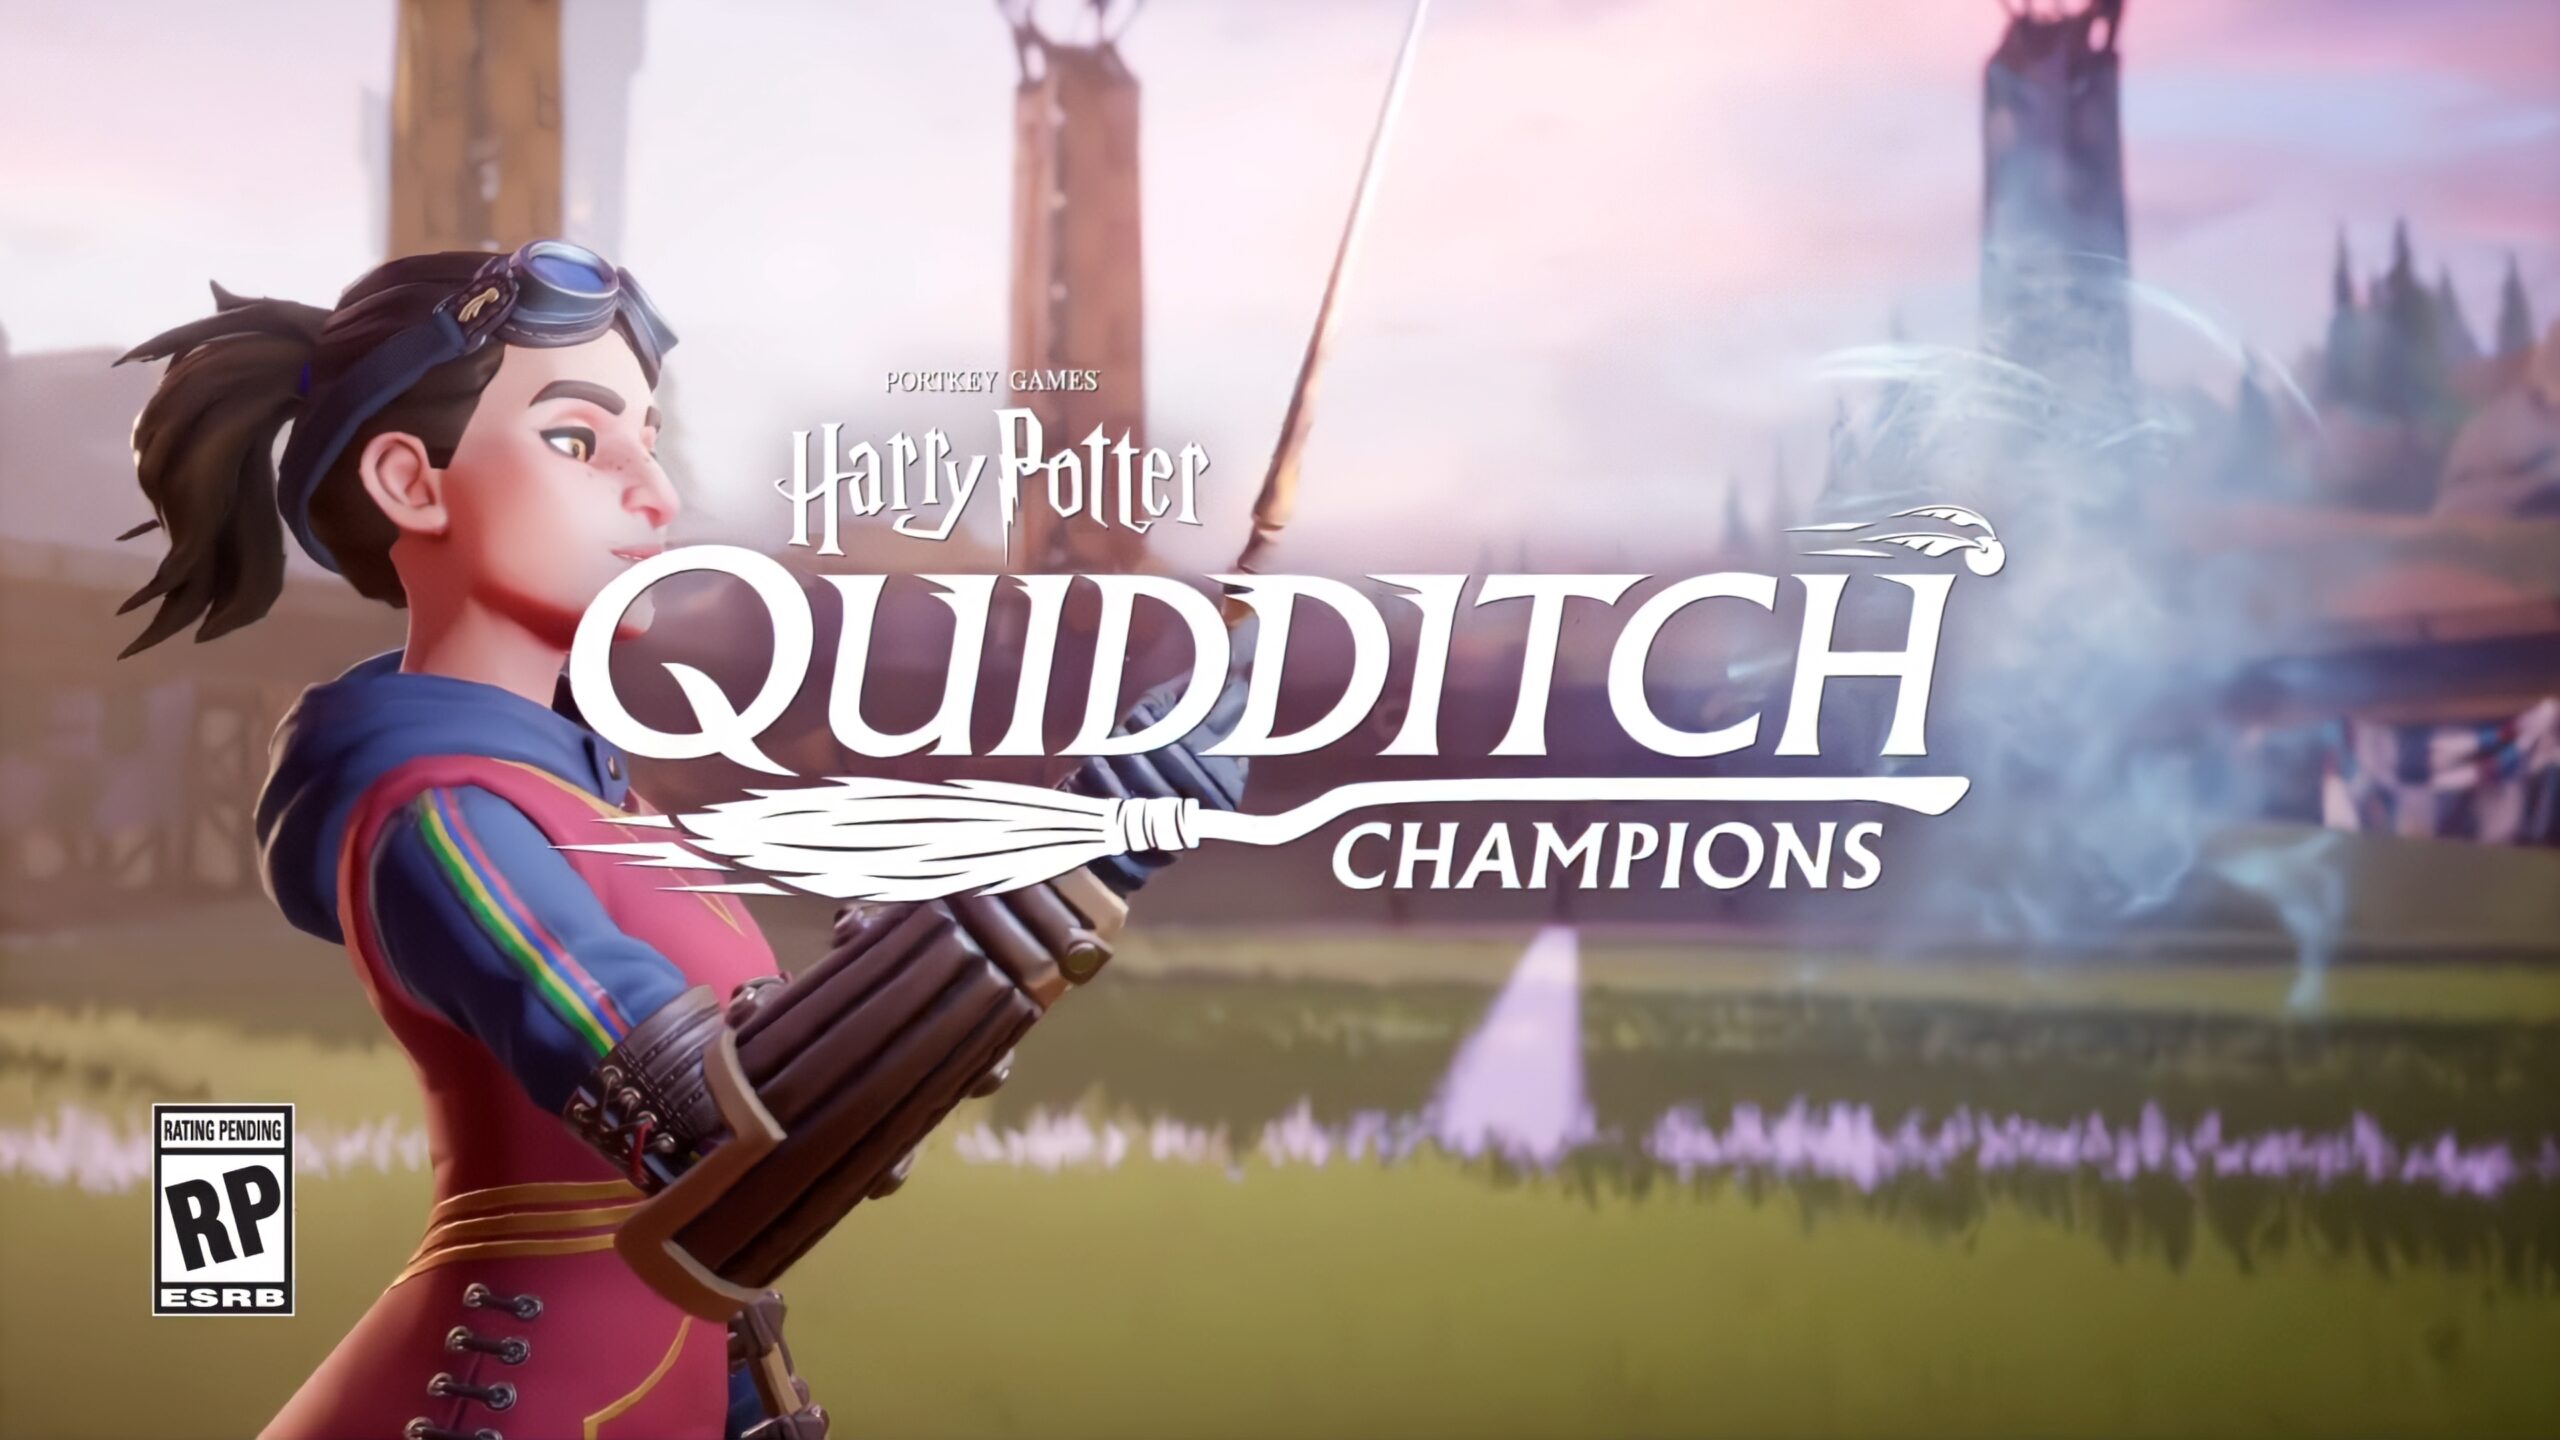 Harry Potter: Quidditch Champions Announced by Unbroken Studios and Warner Bros for PC and Consoles